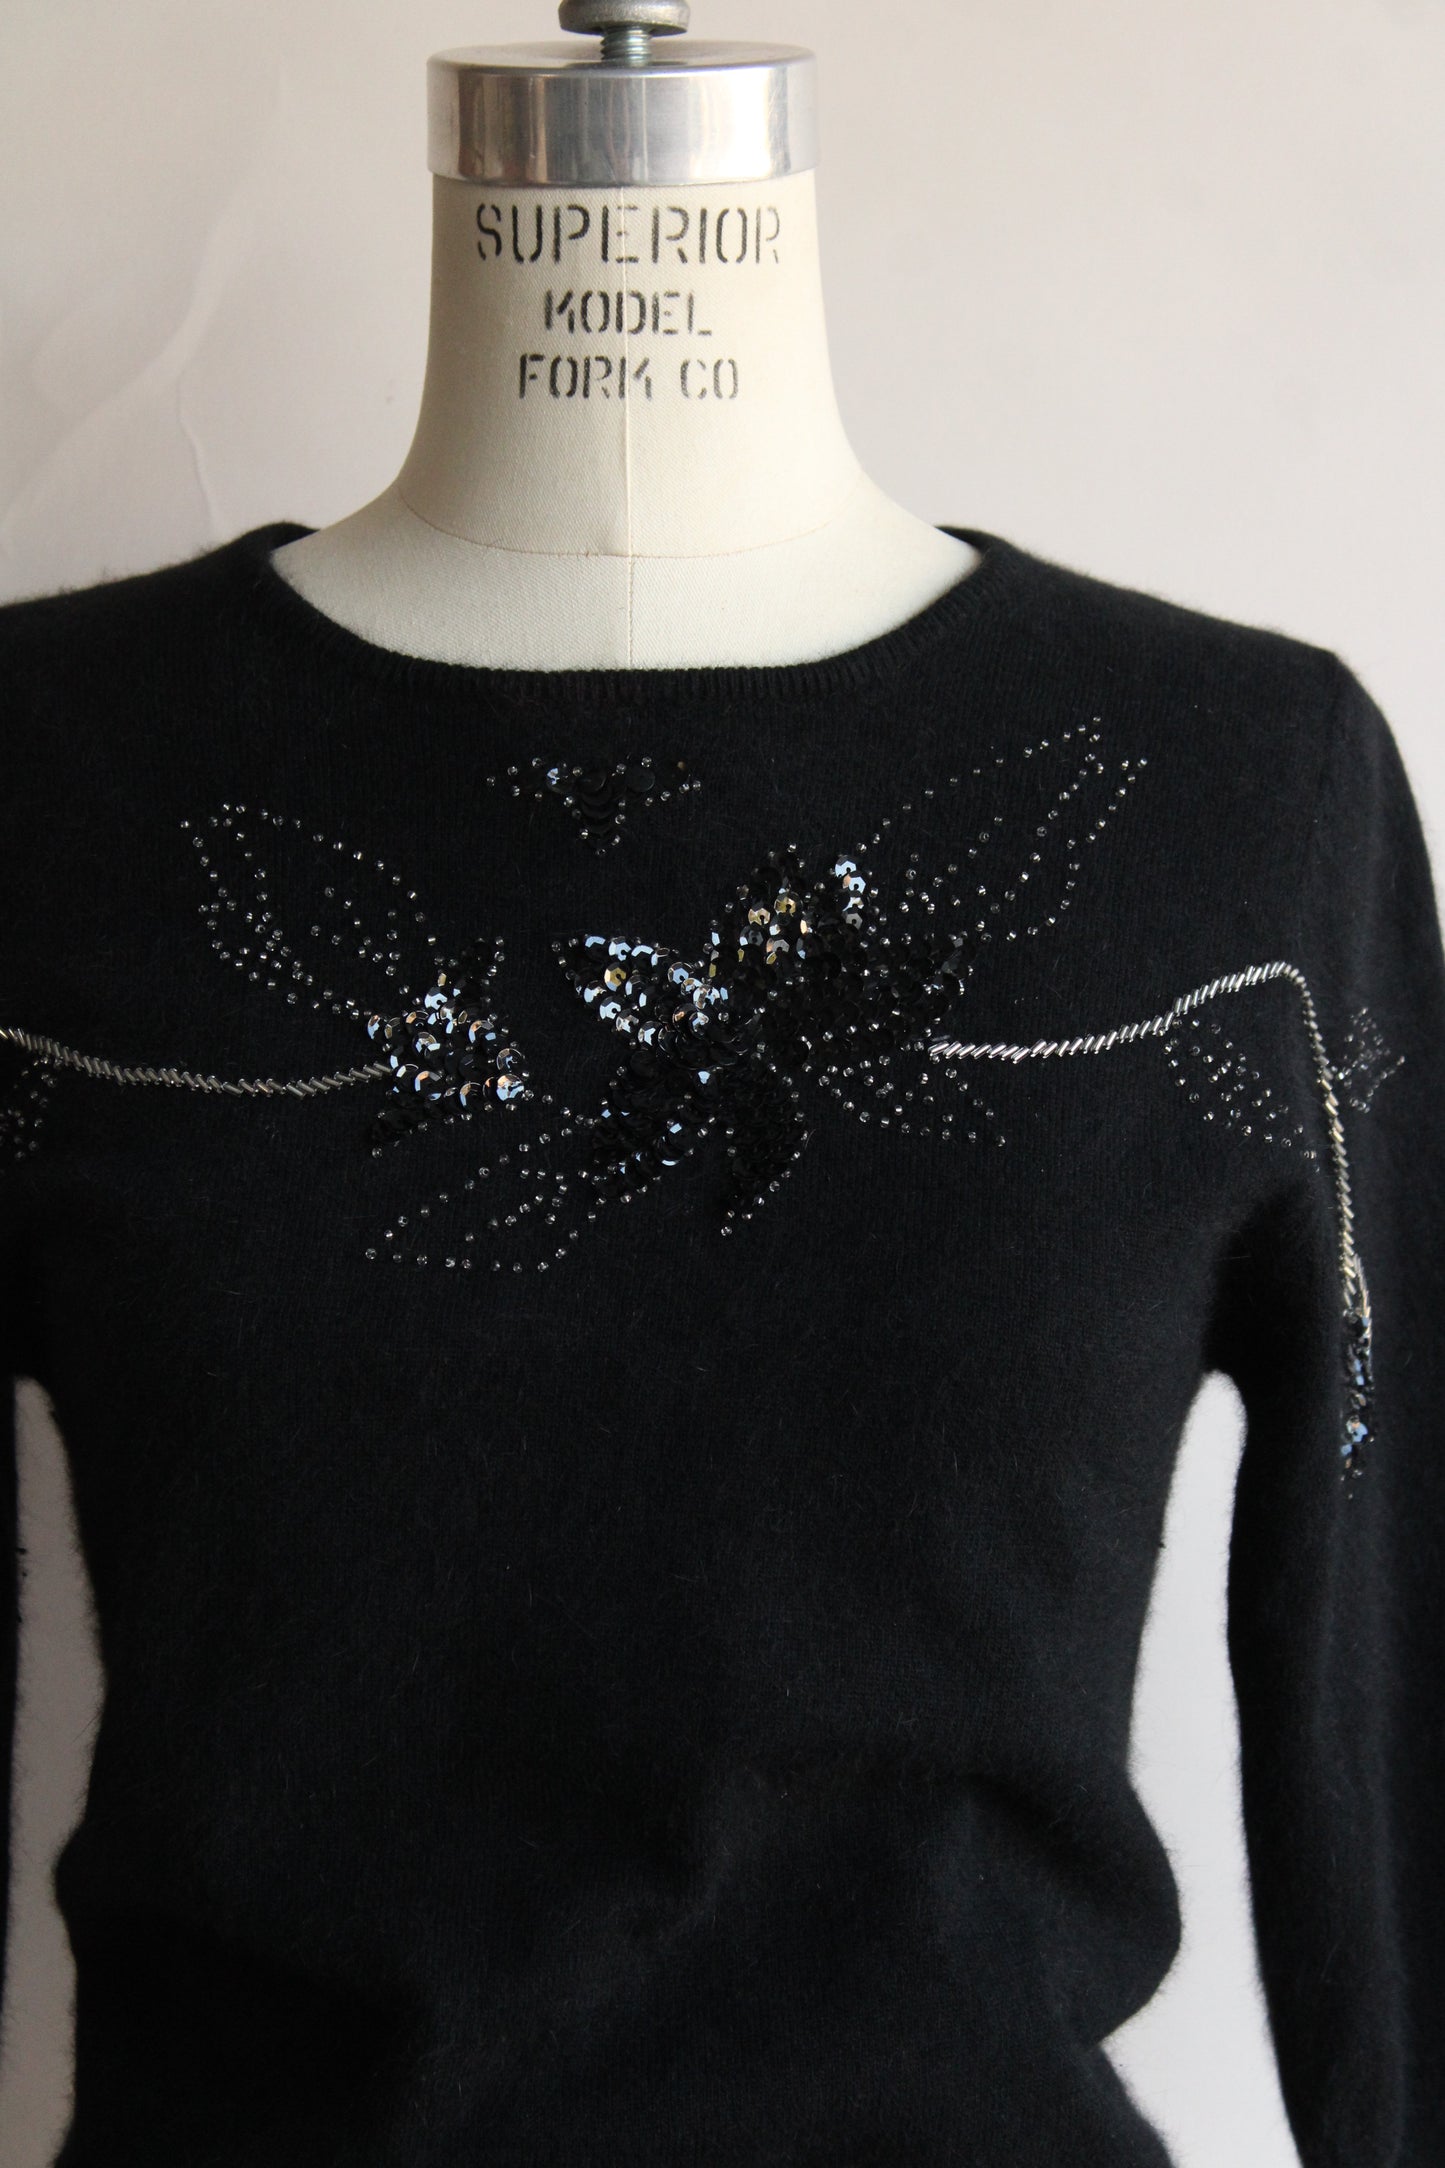 Vintage 1980s Does 1940s Angora Sweater with Keyhole Back and Beading